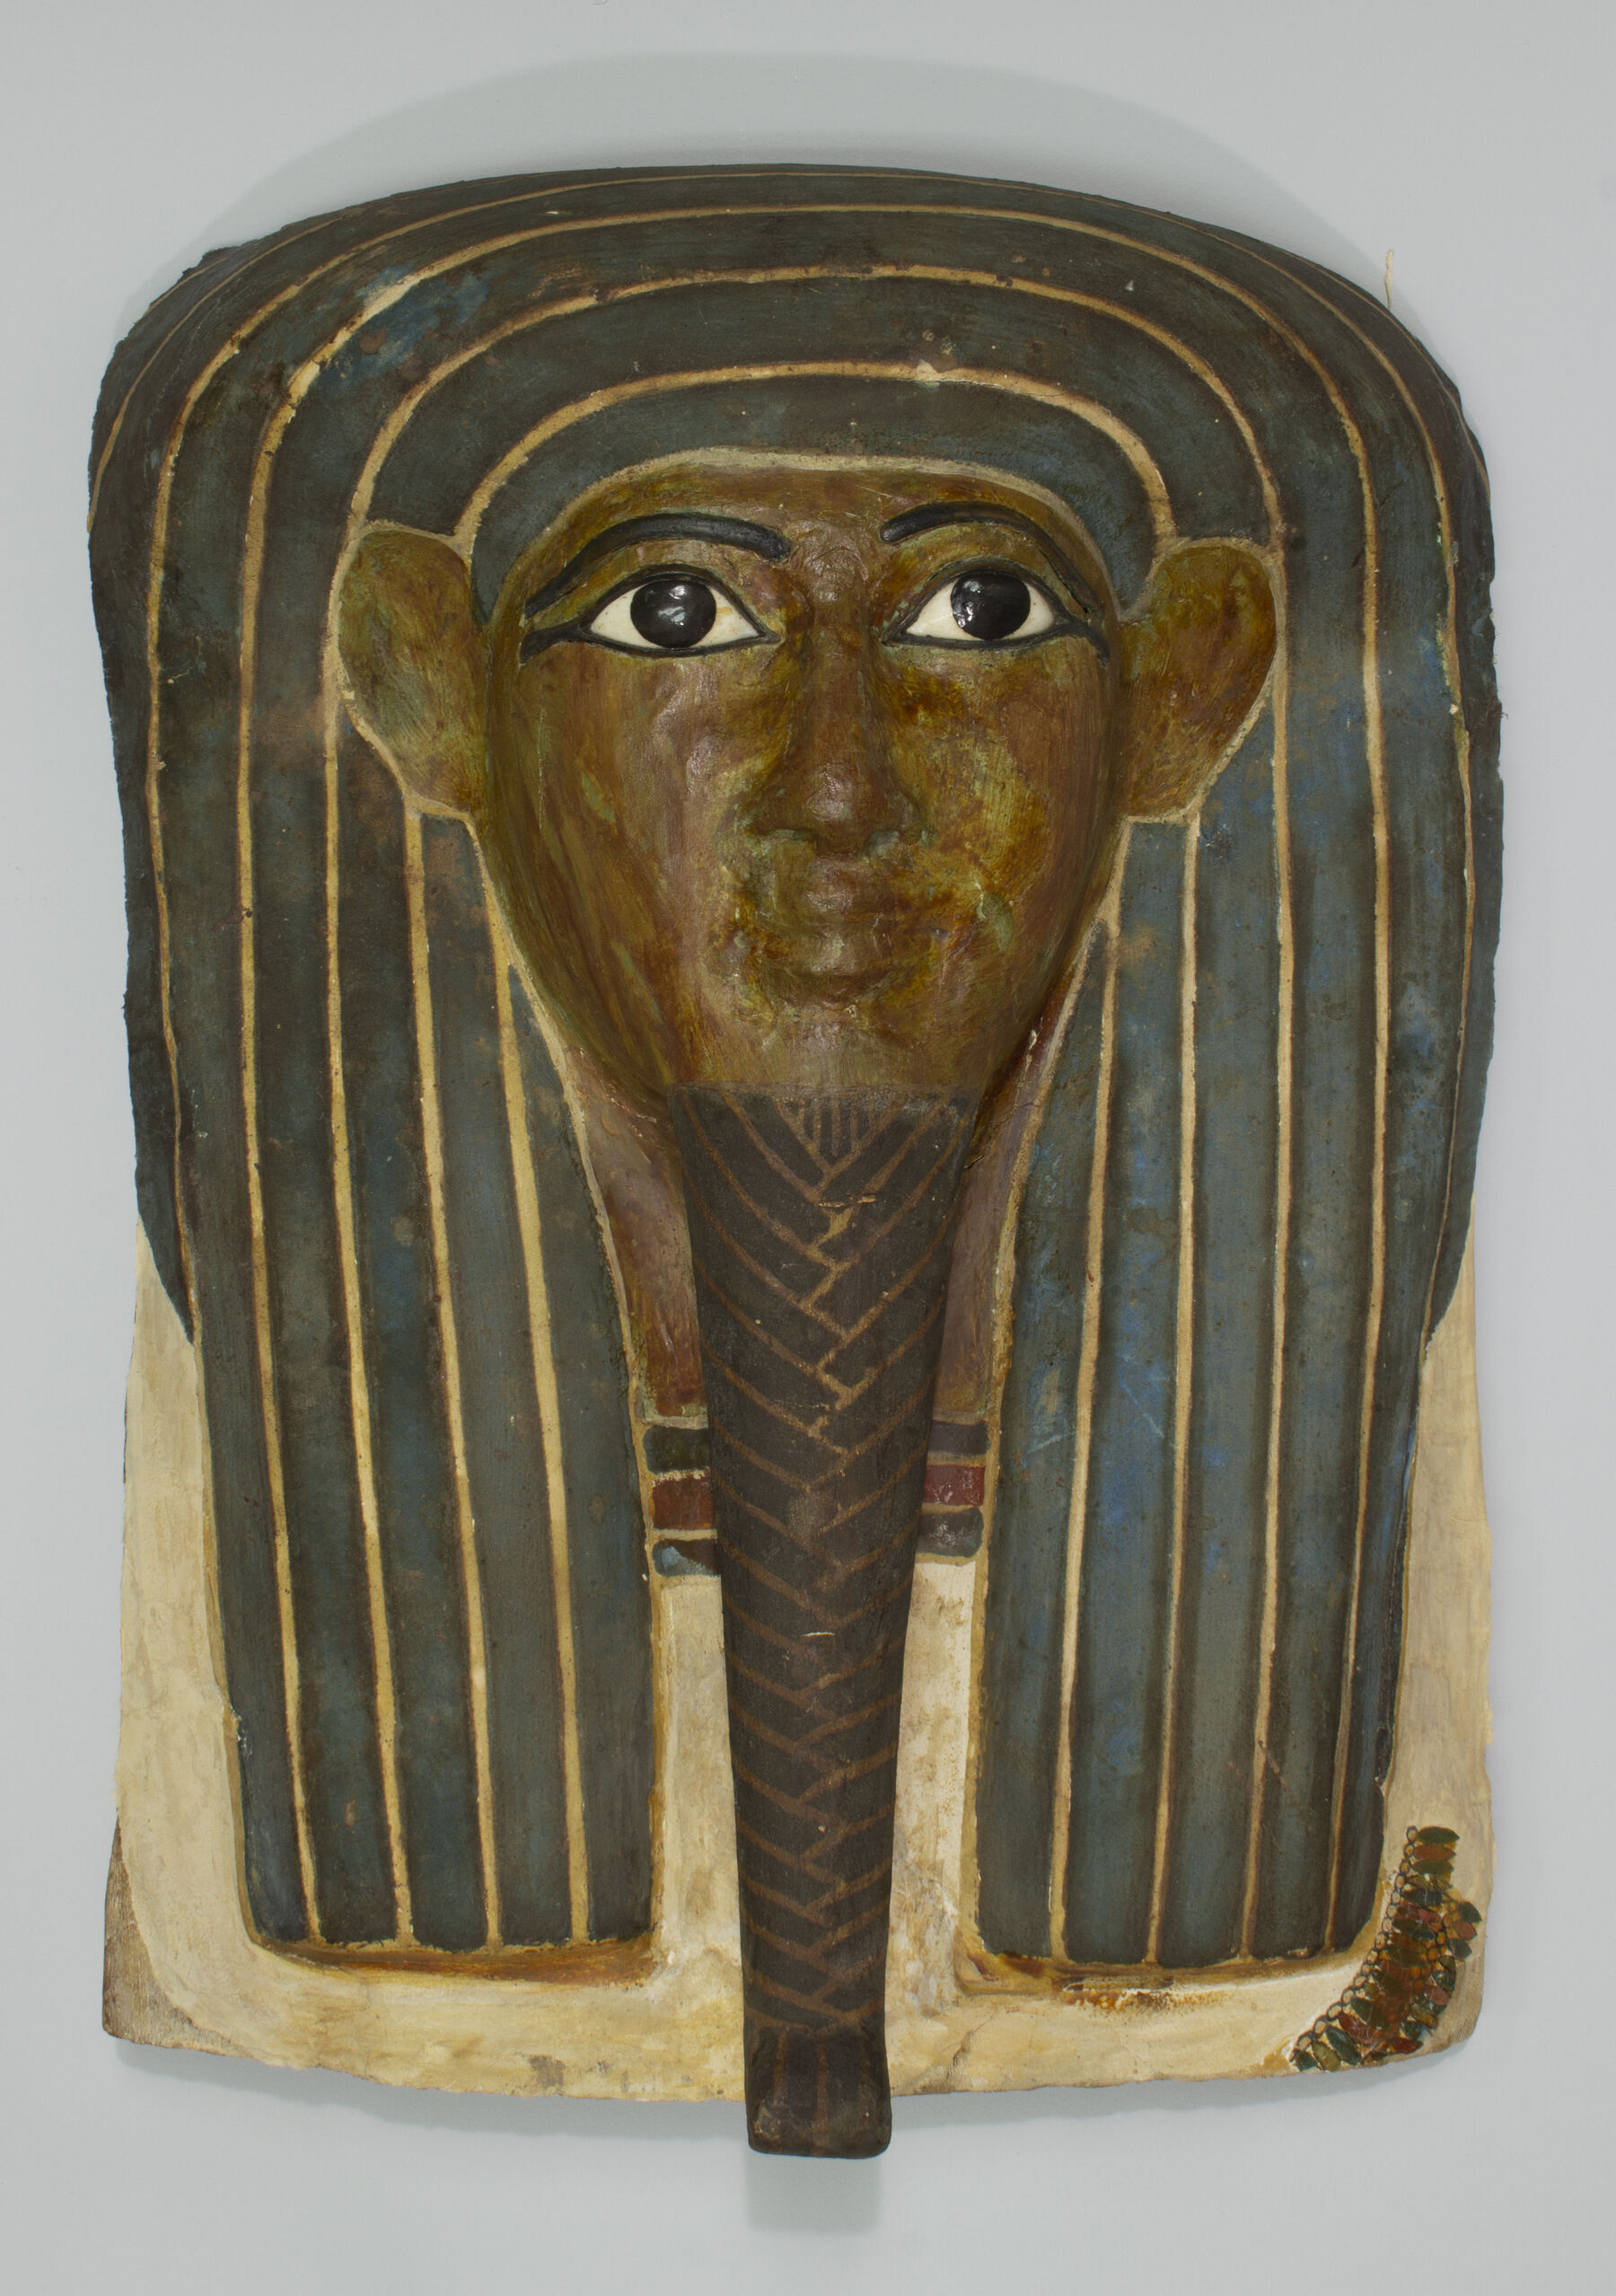 Head from a Coffin Lid